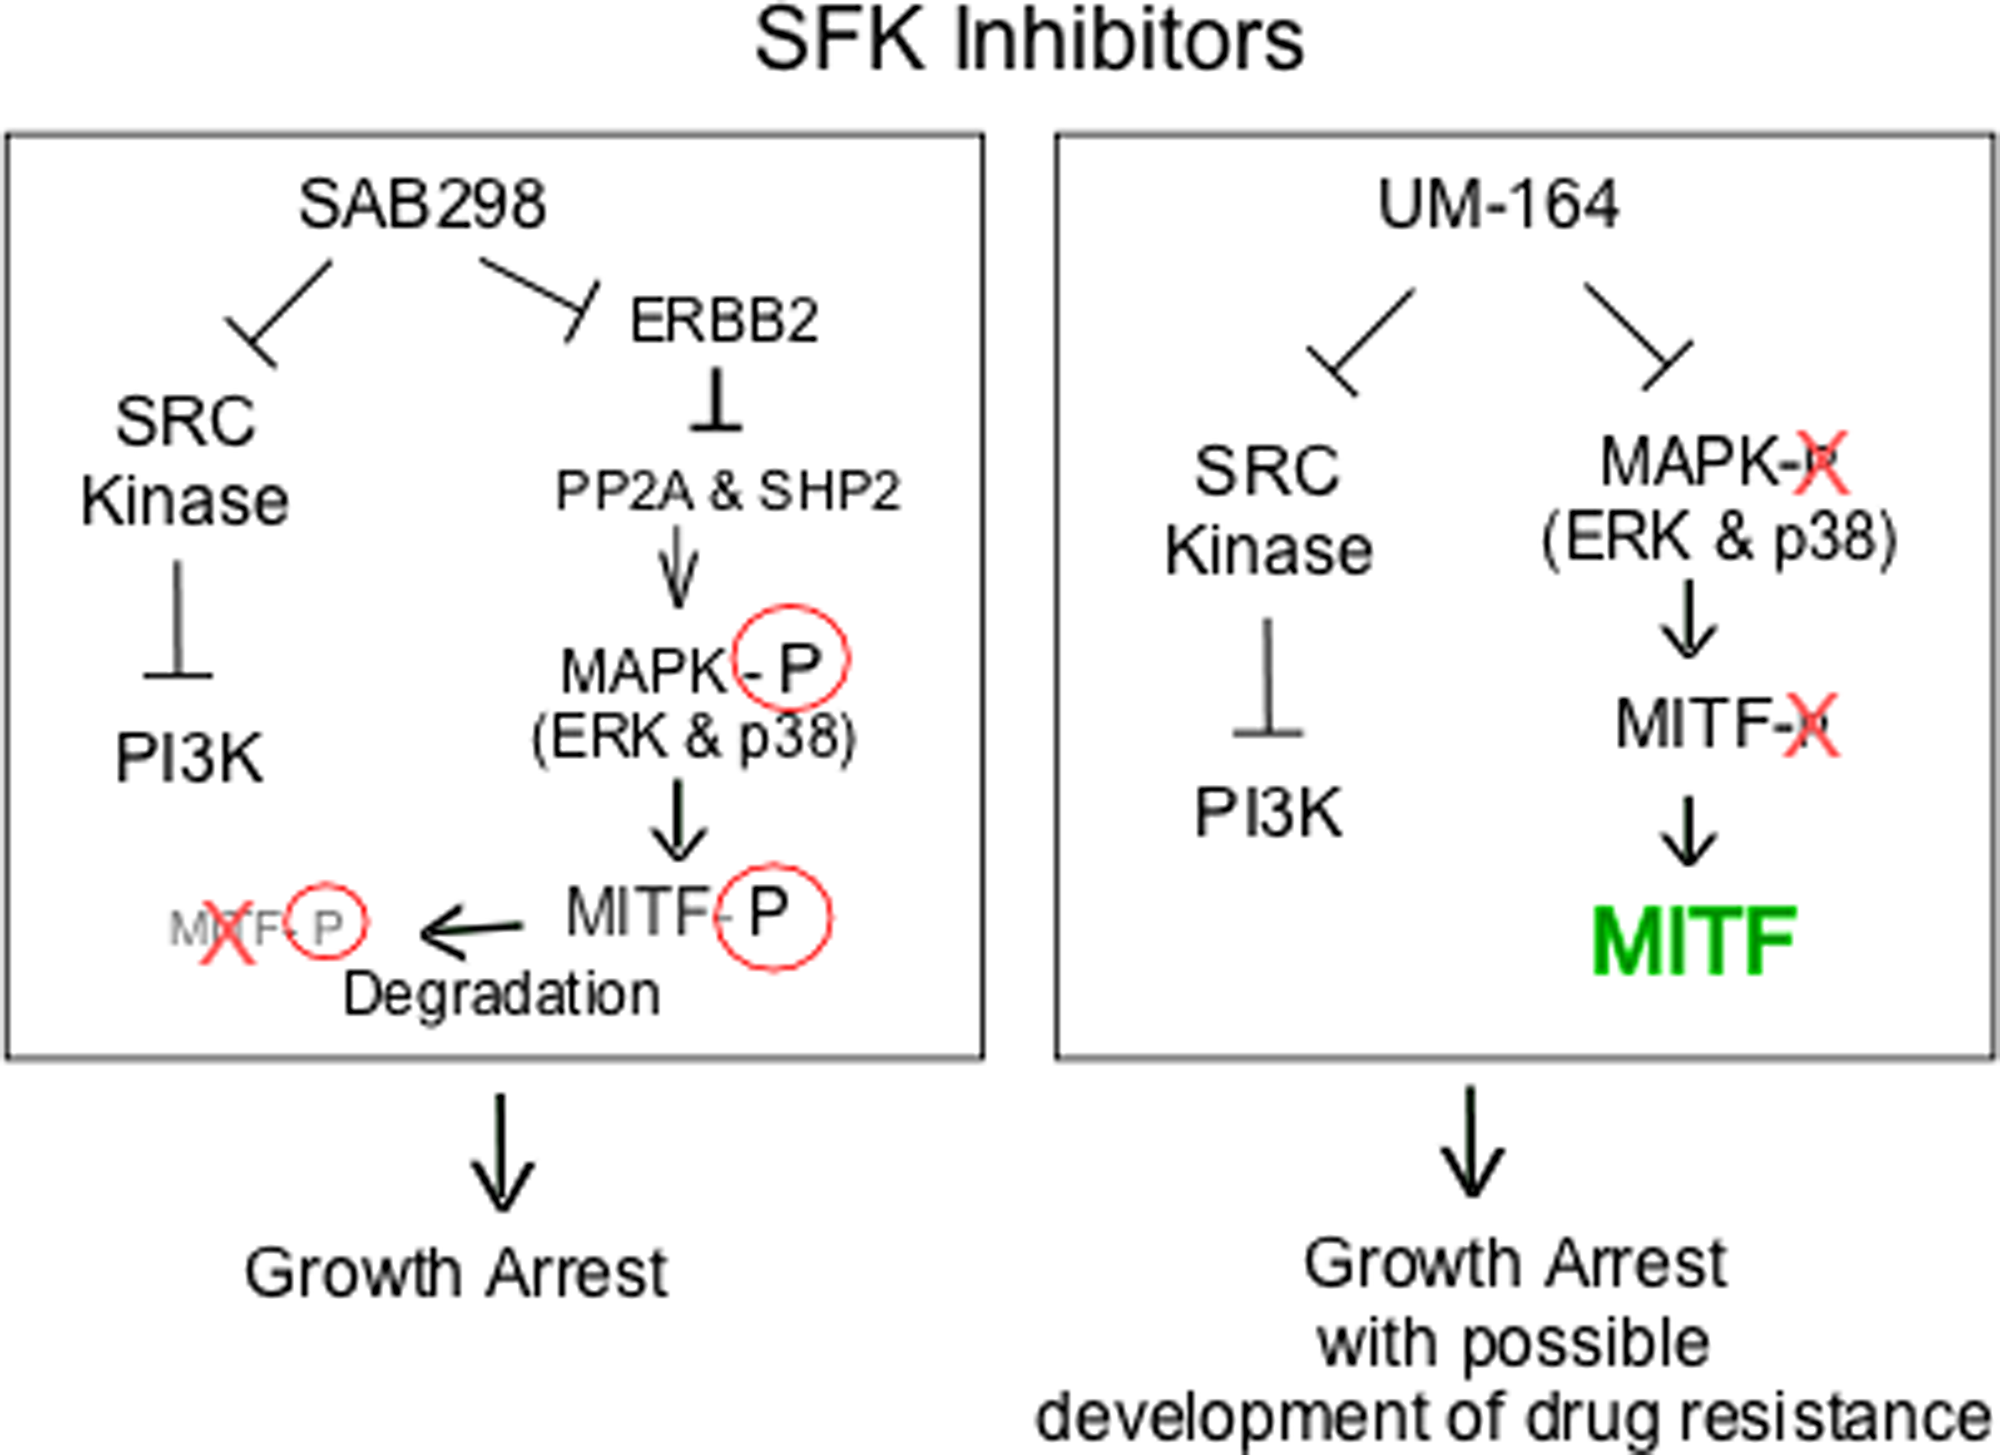 Schematic representation of intracellular signaling induced by SAB298 and UM-164.